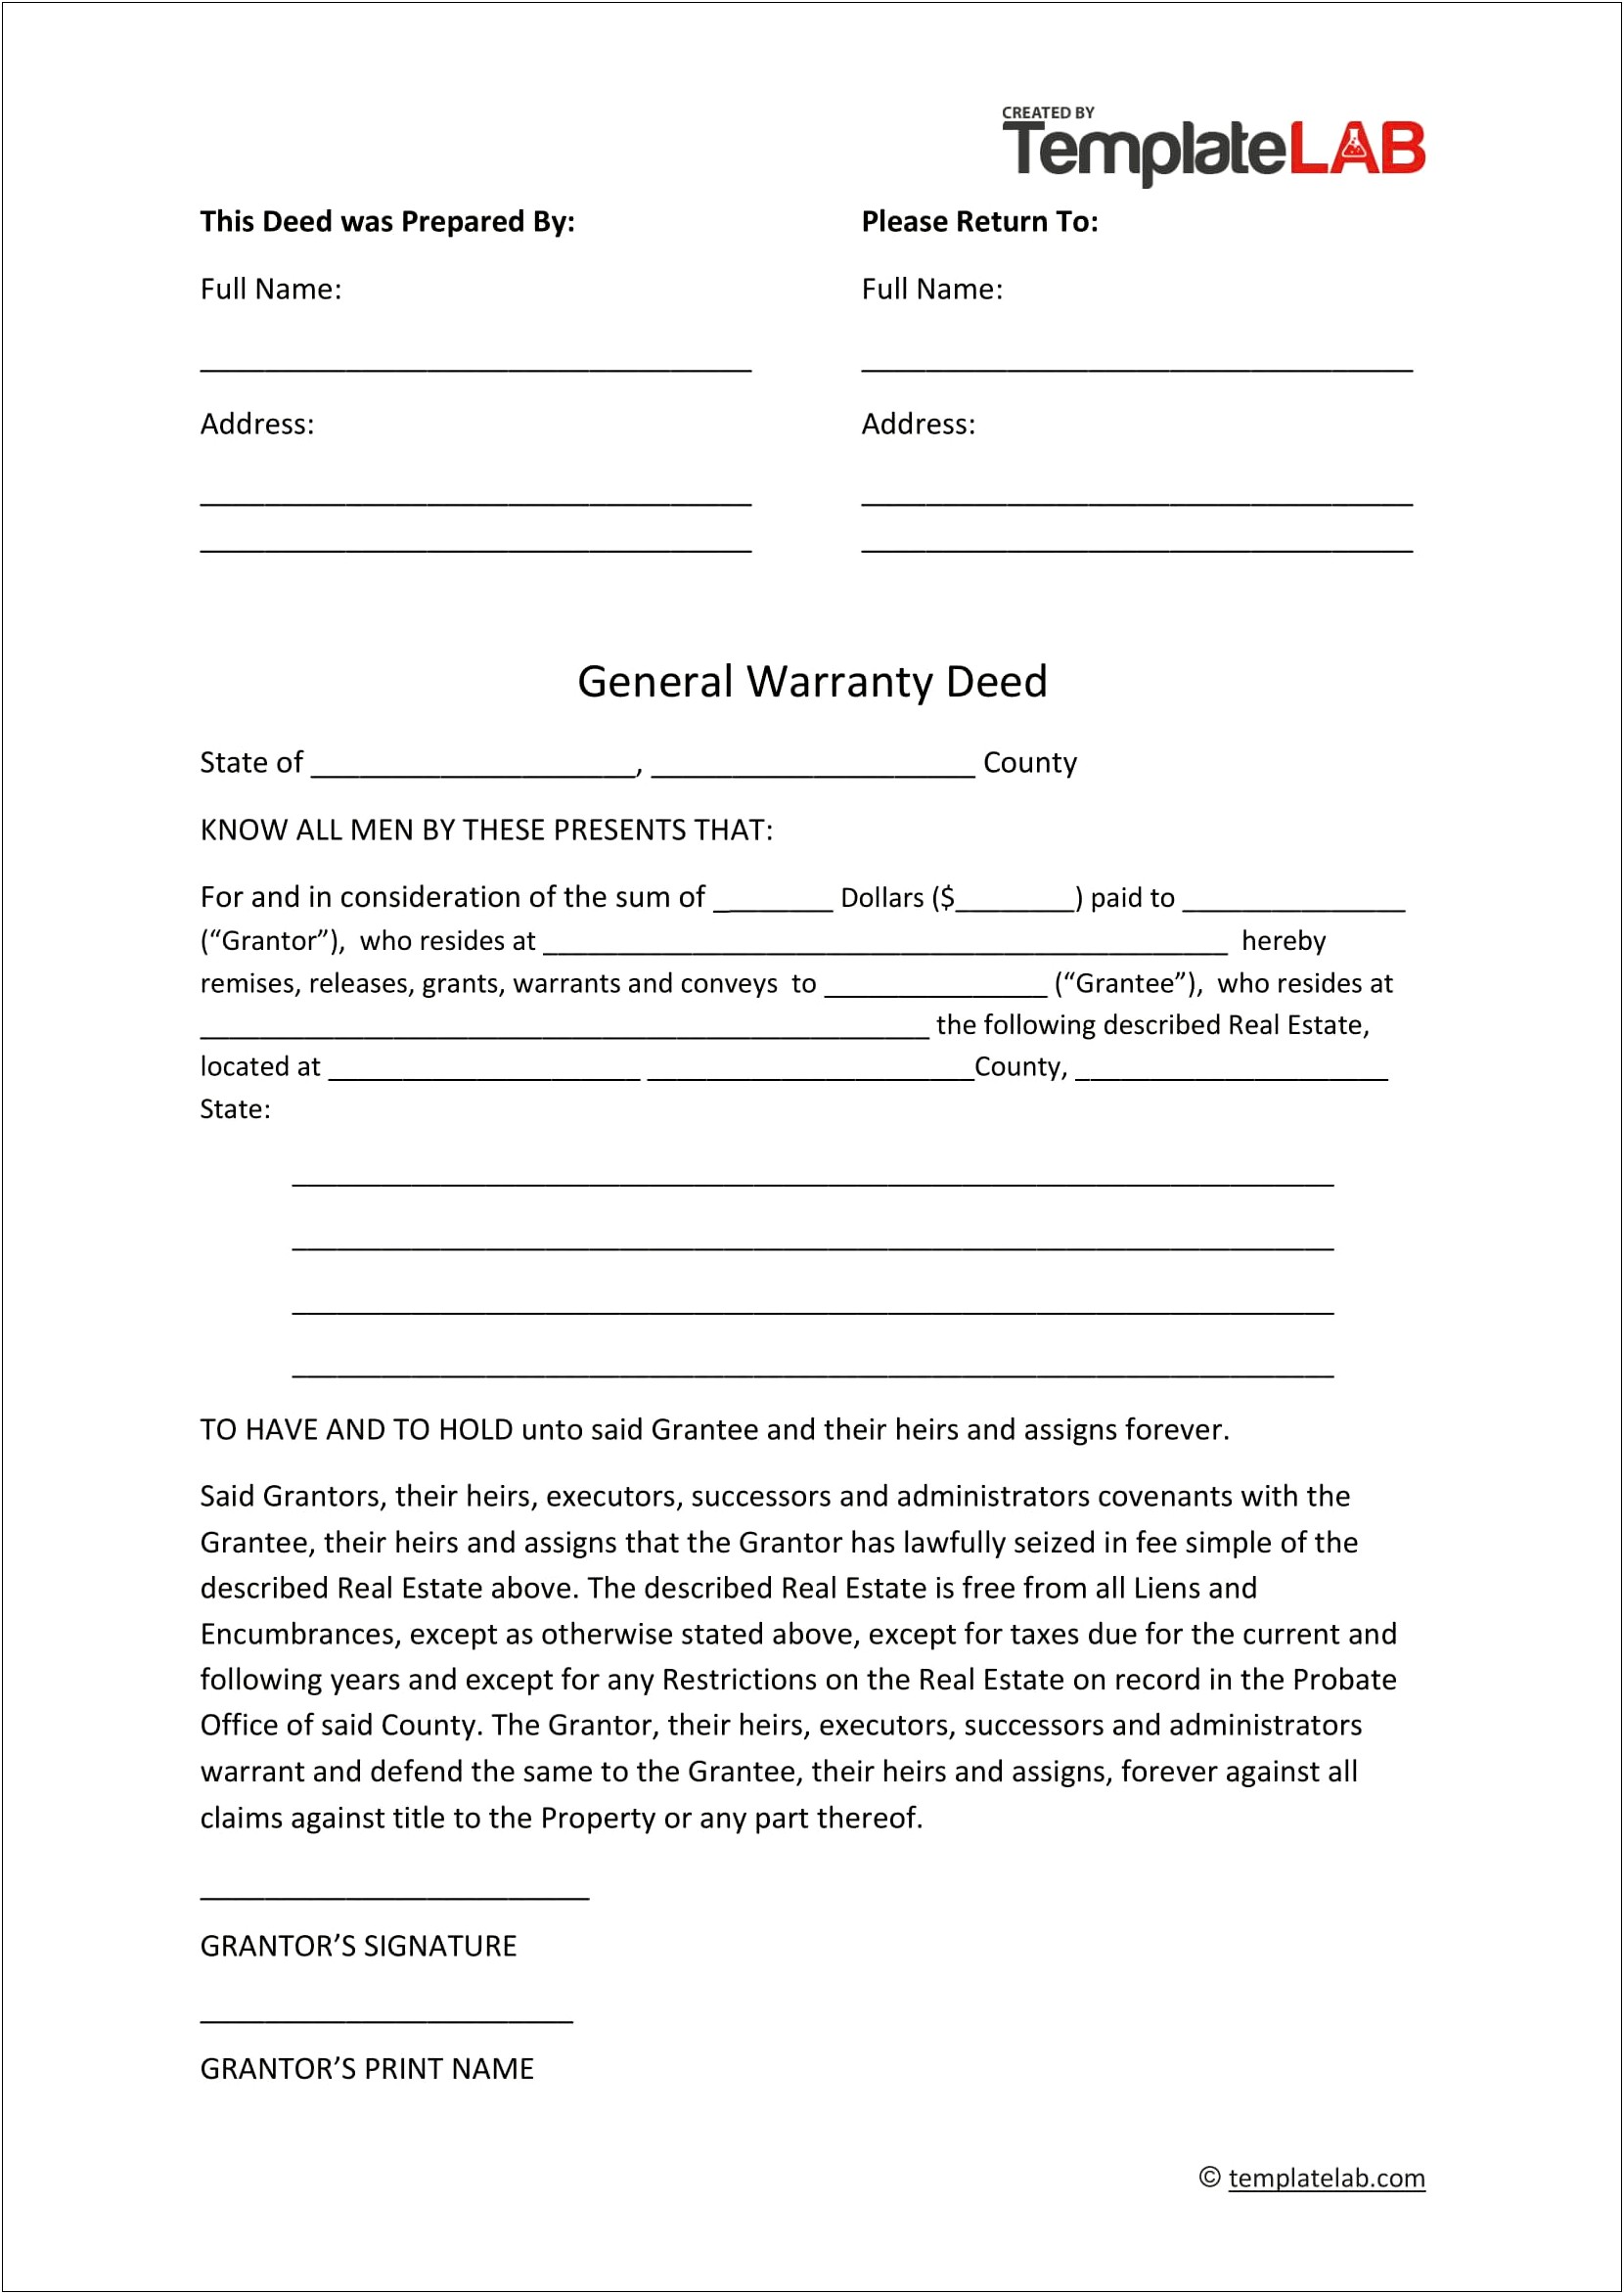 Free Deed Of Real Estate Template